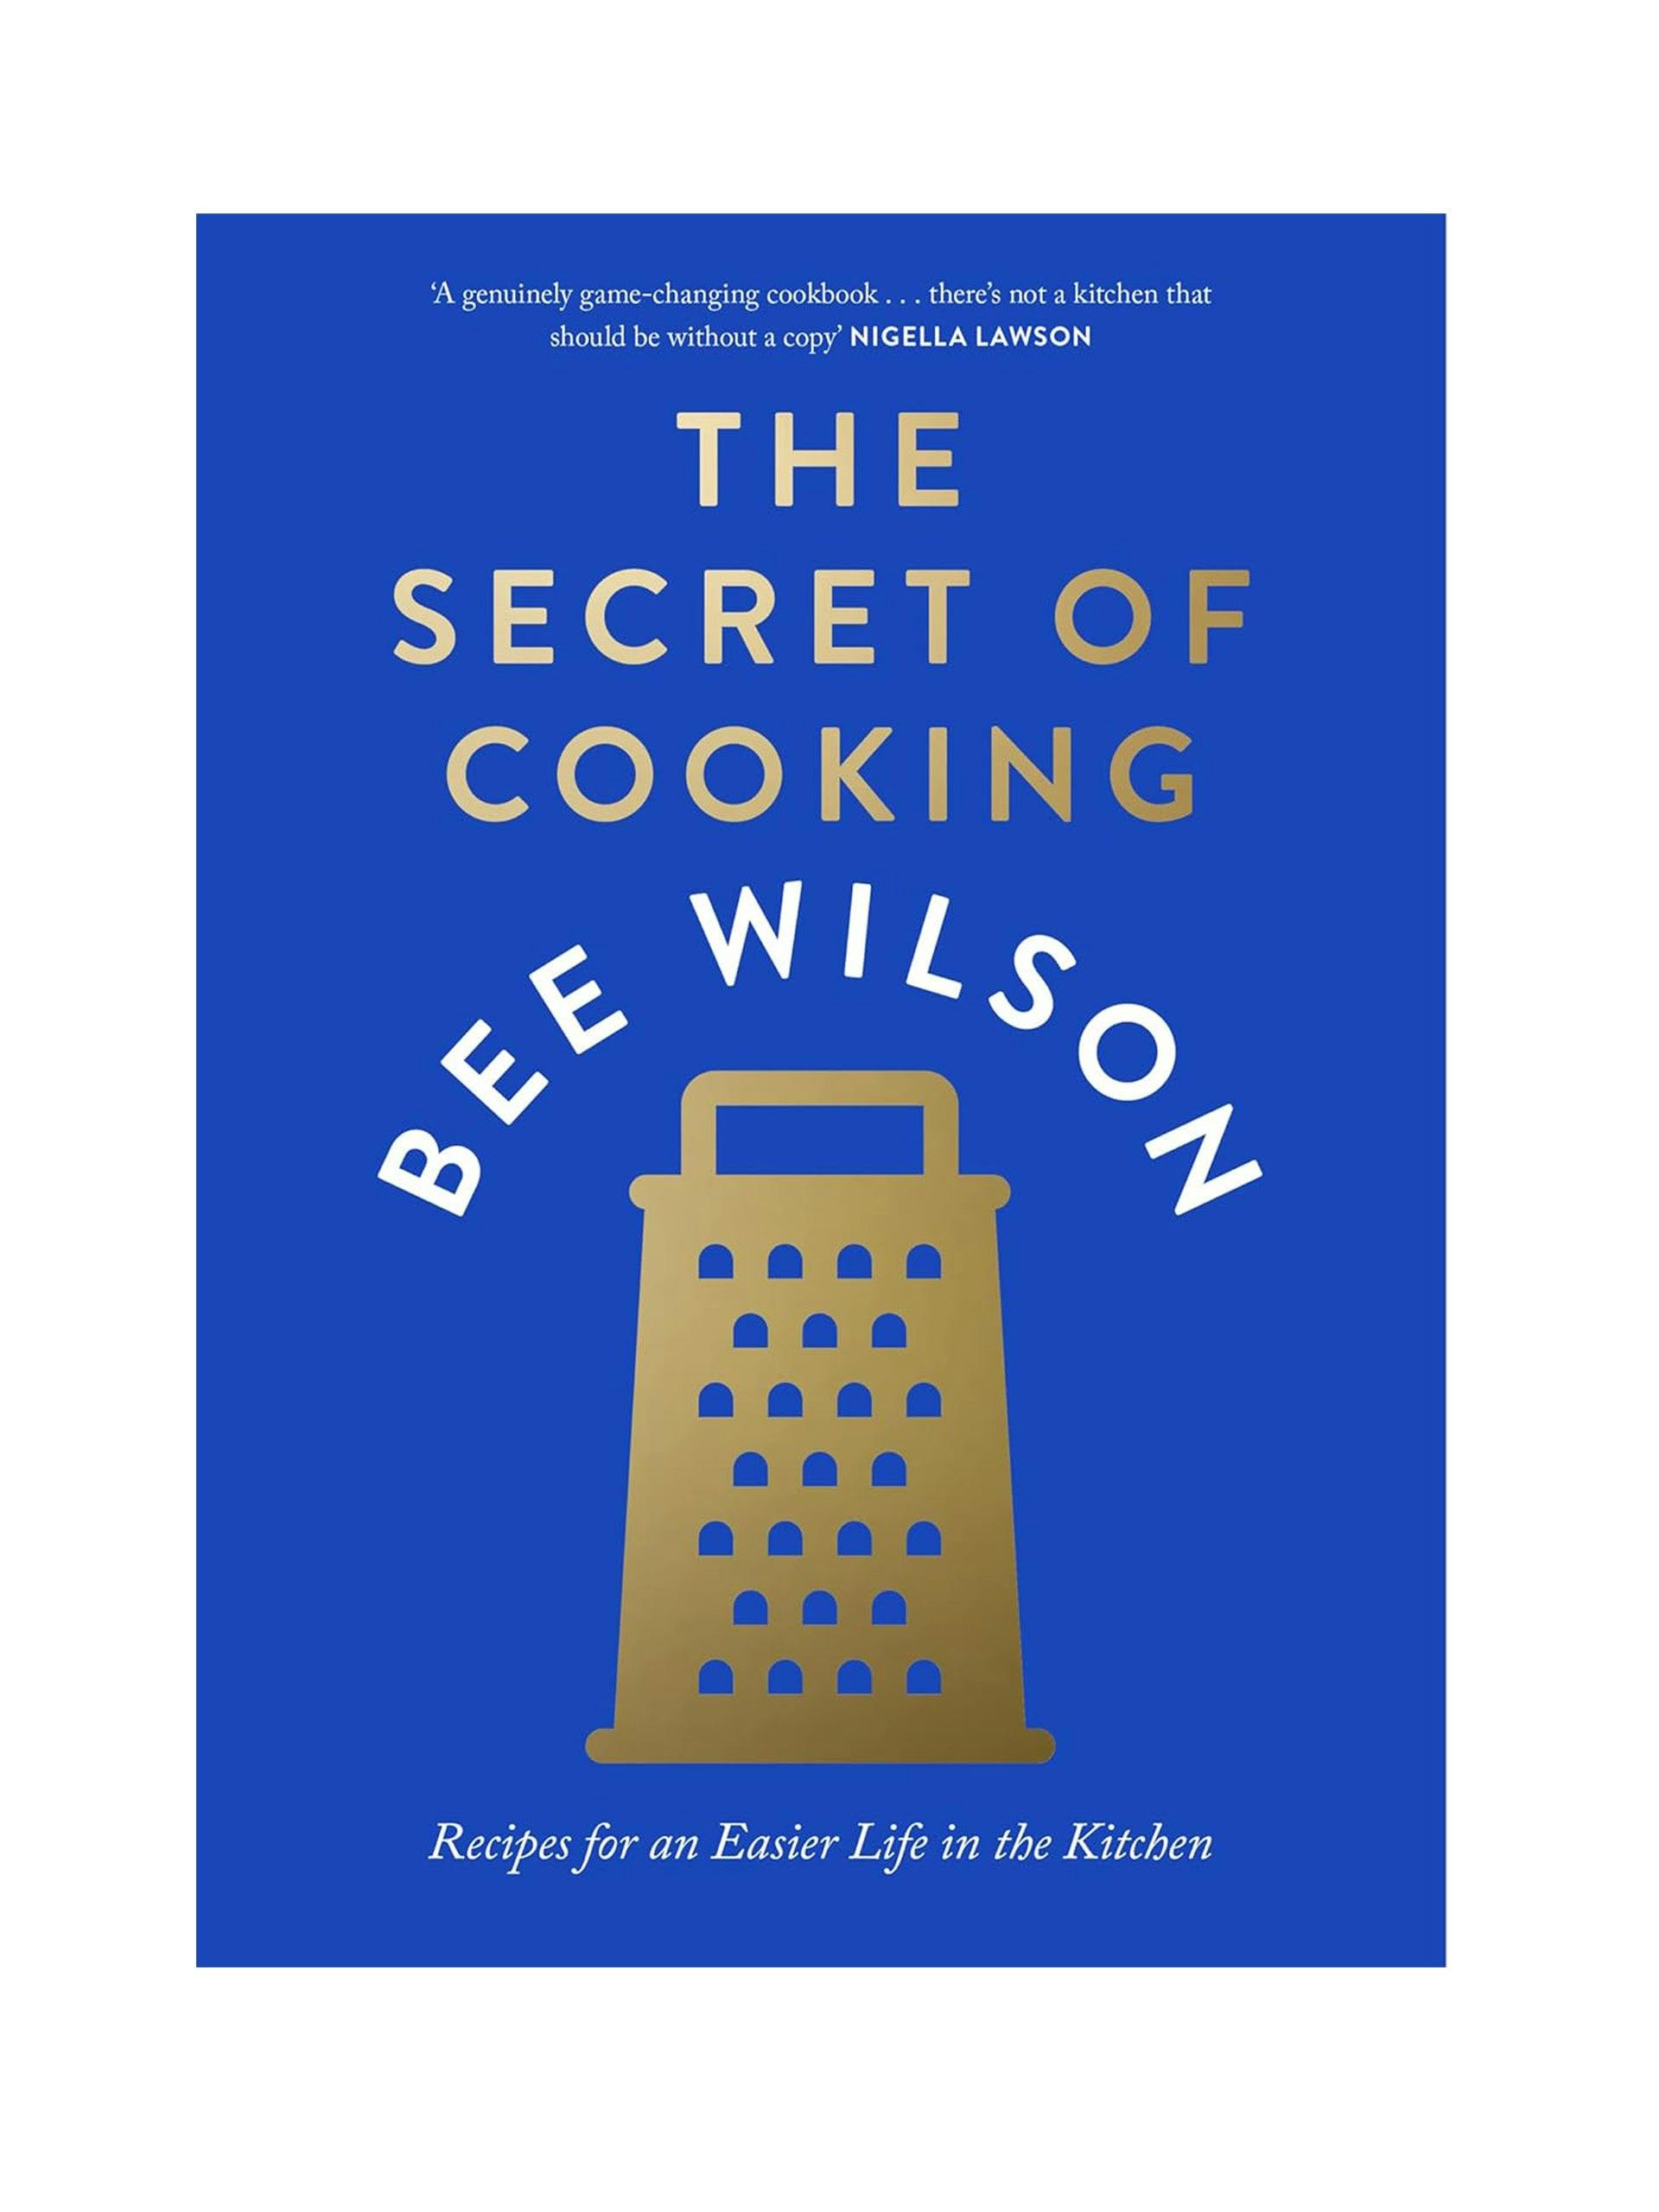 The secret of cooking